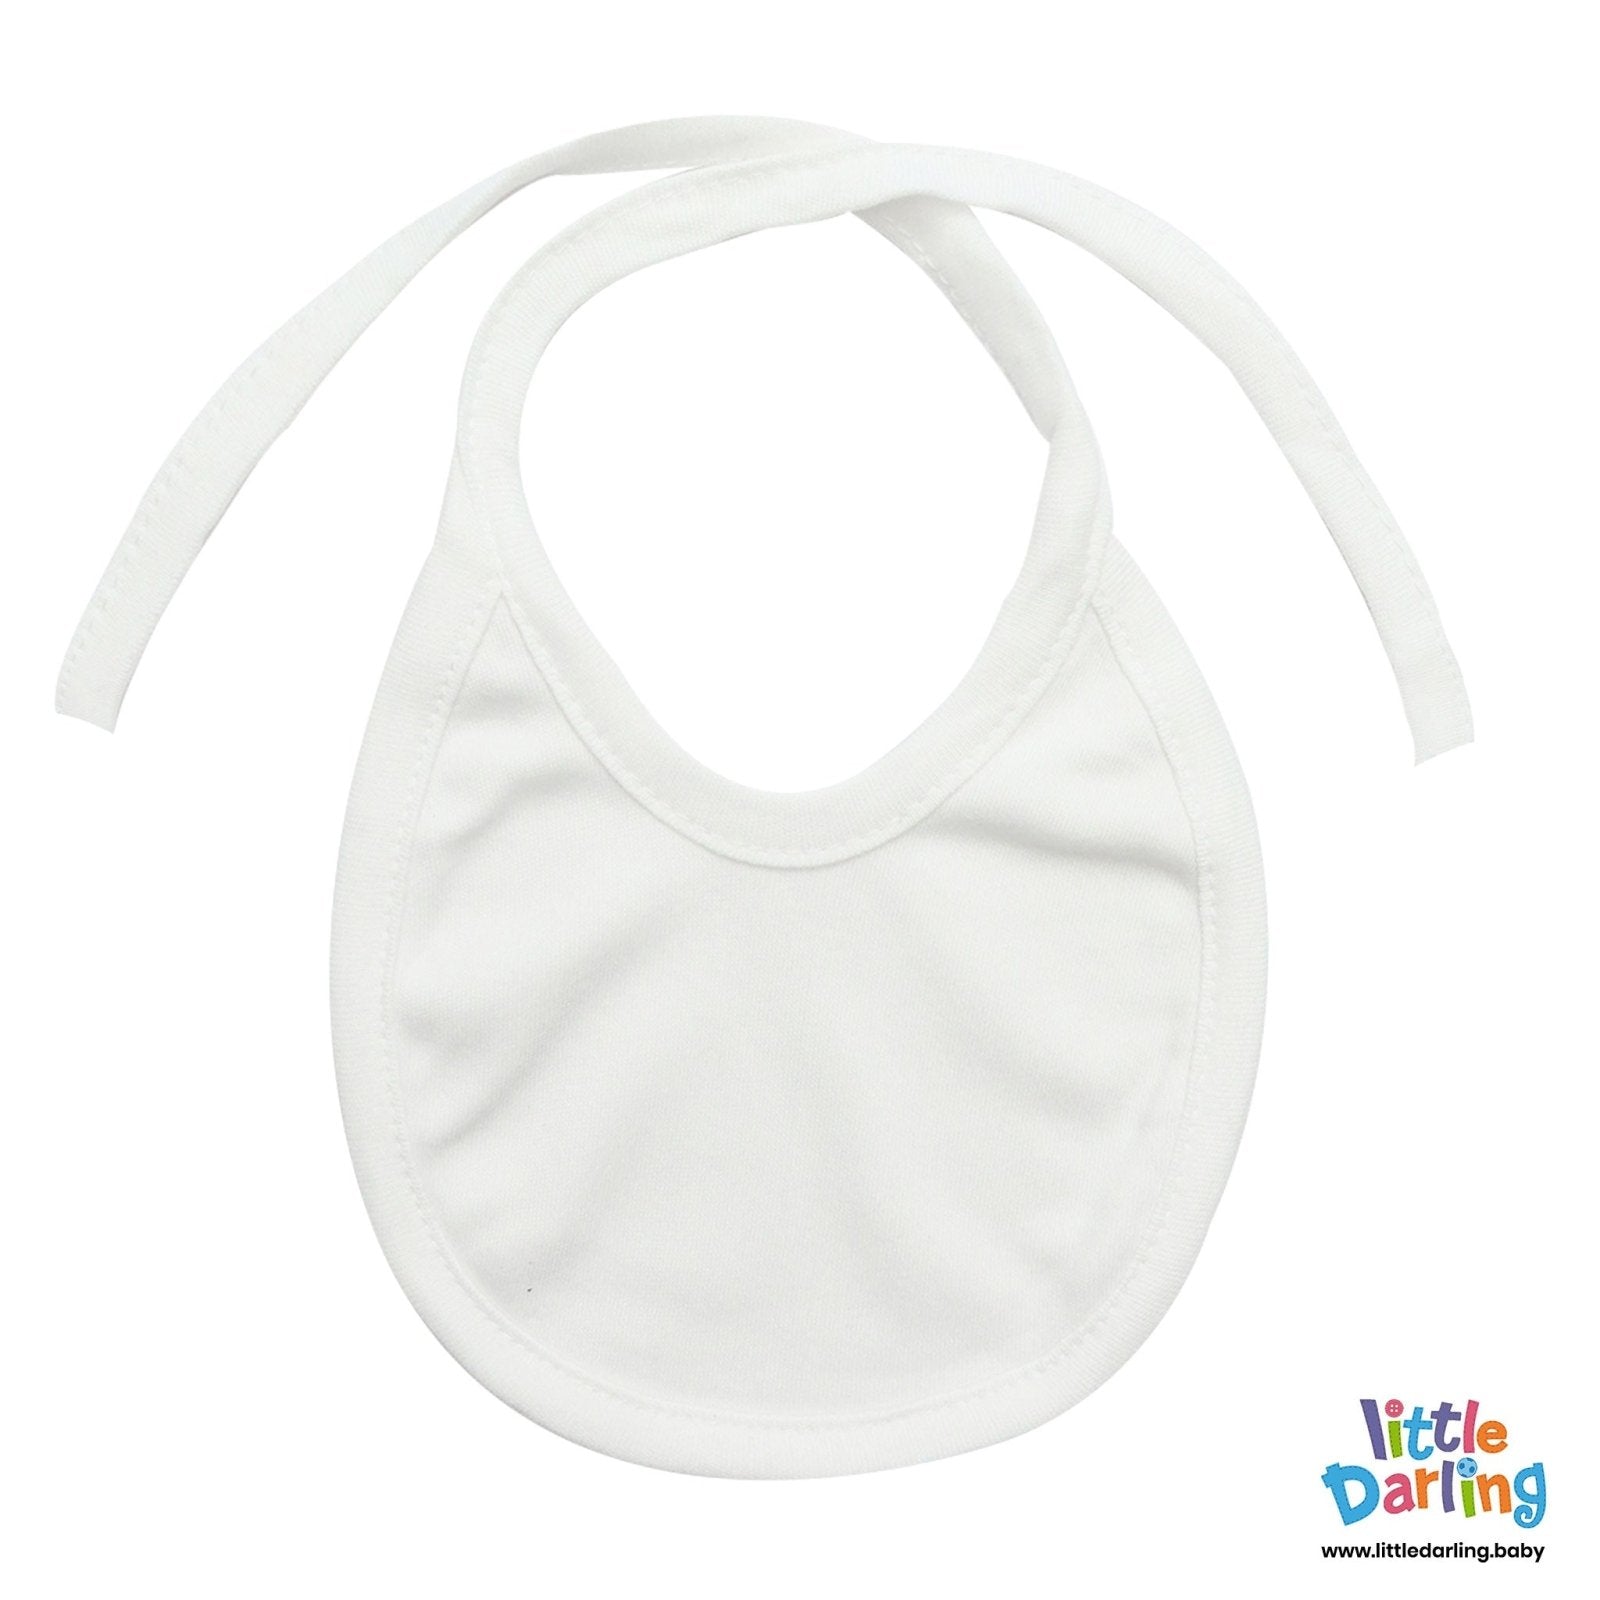 Plain White Pack of 5 Bibs by Little Darling